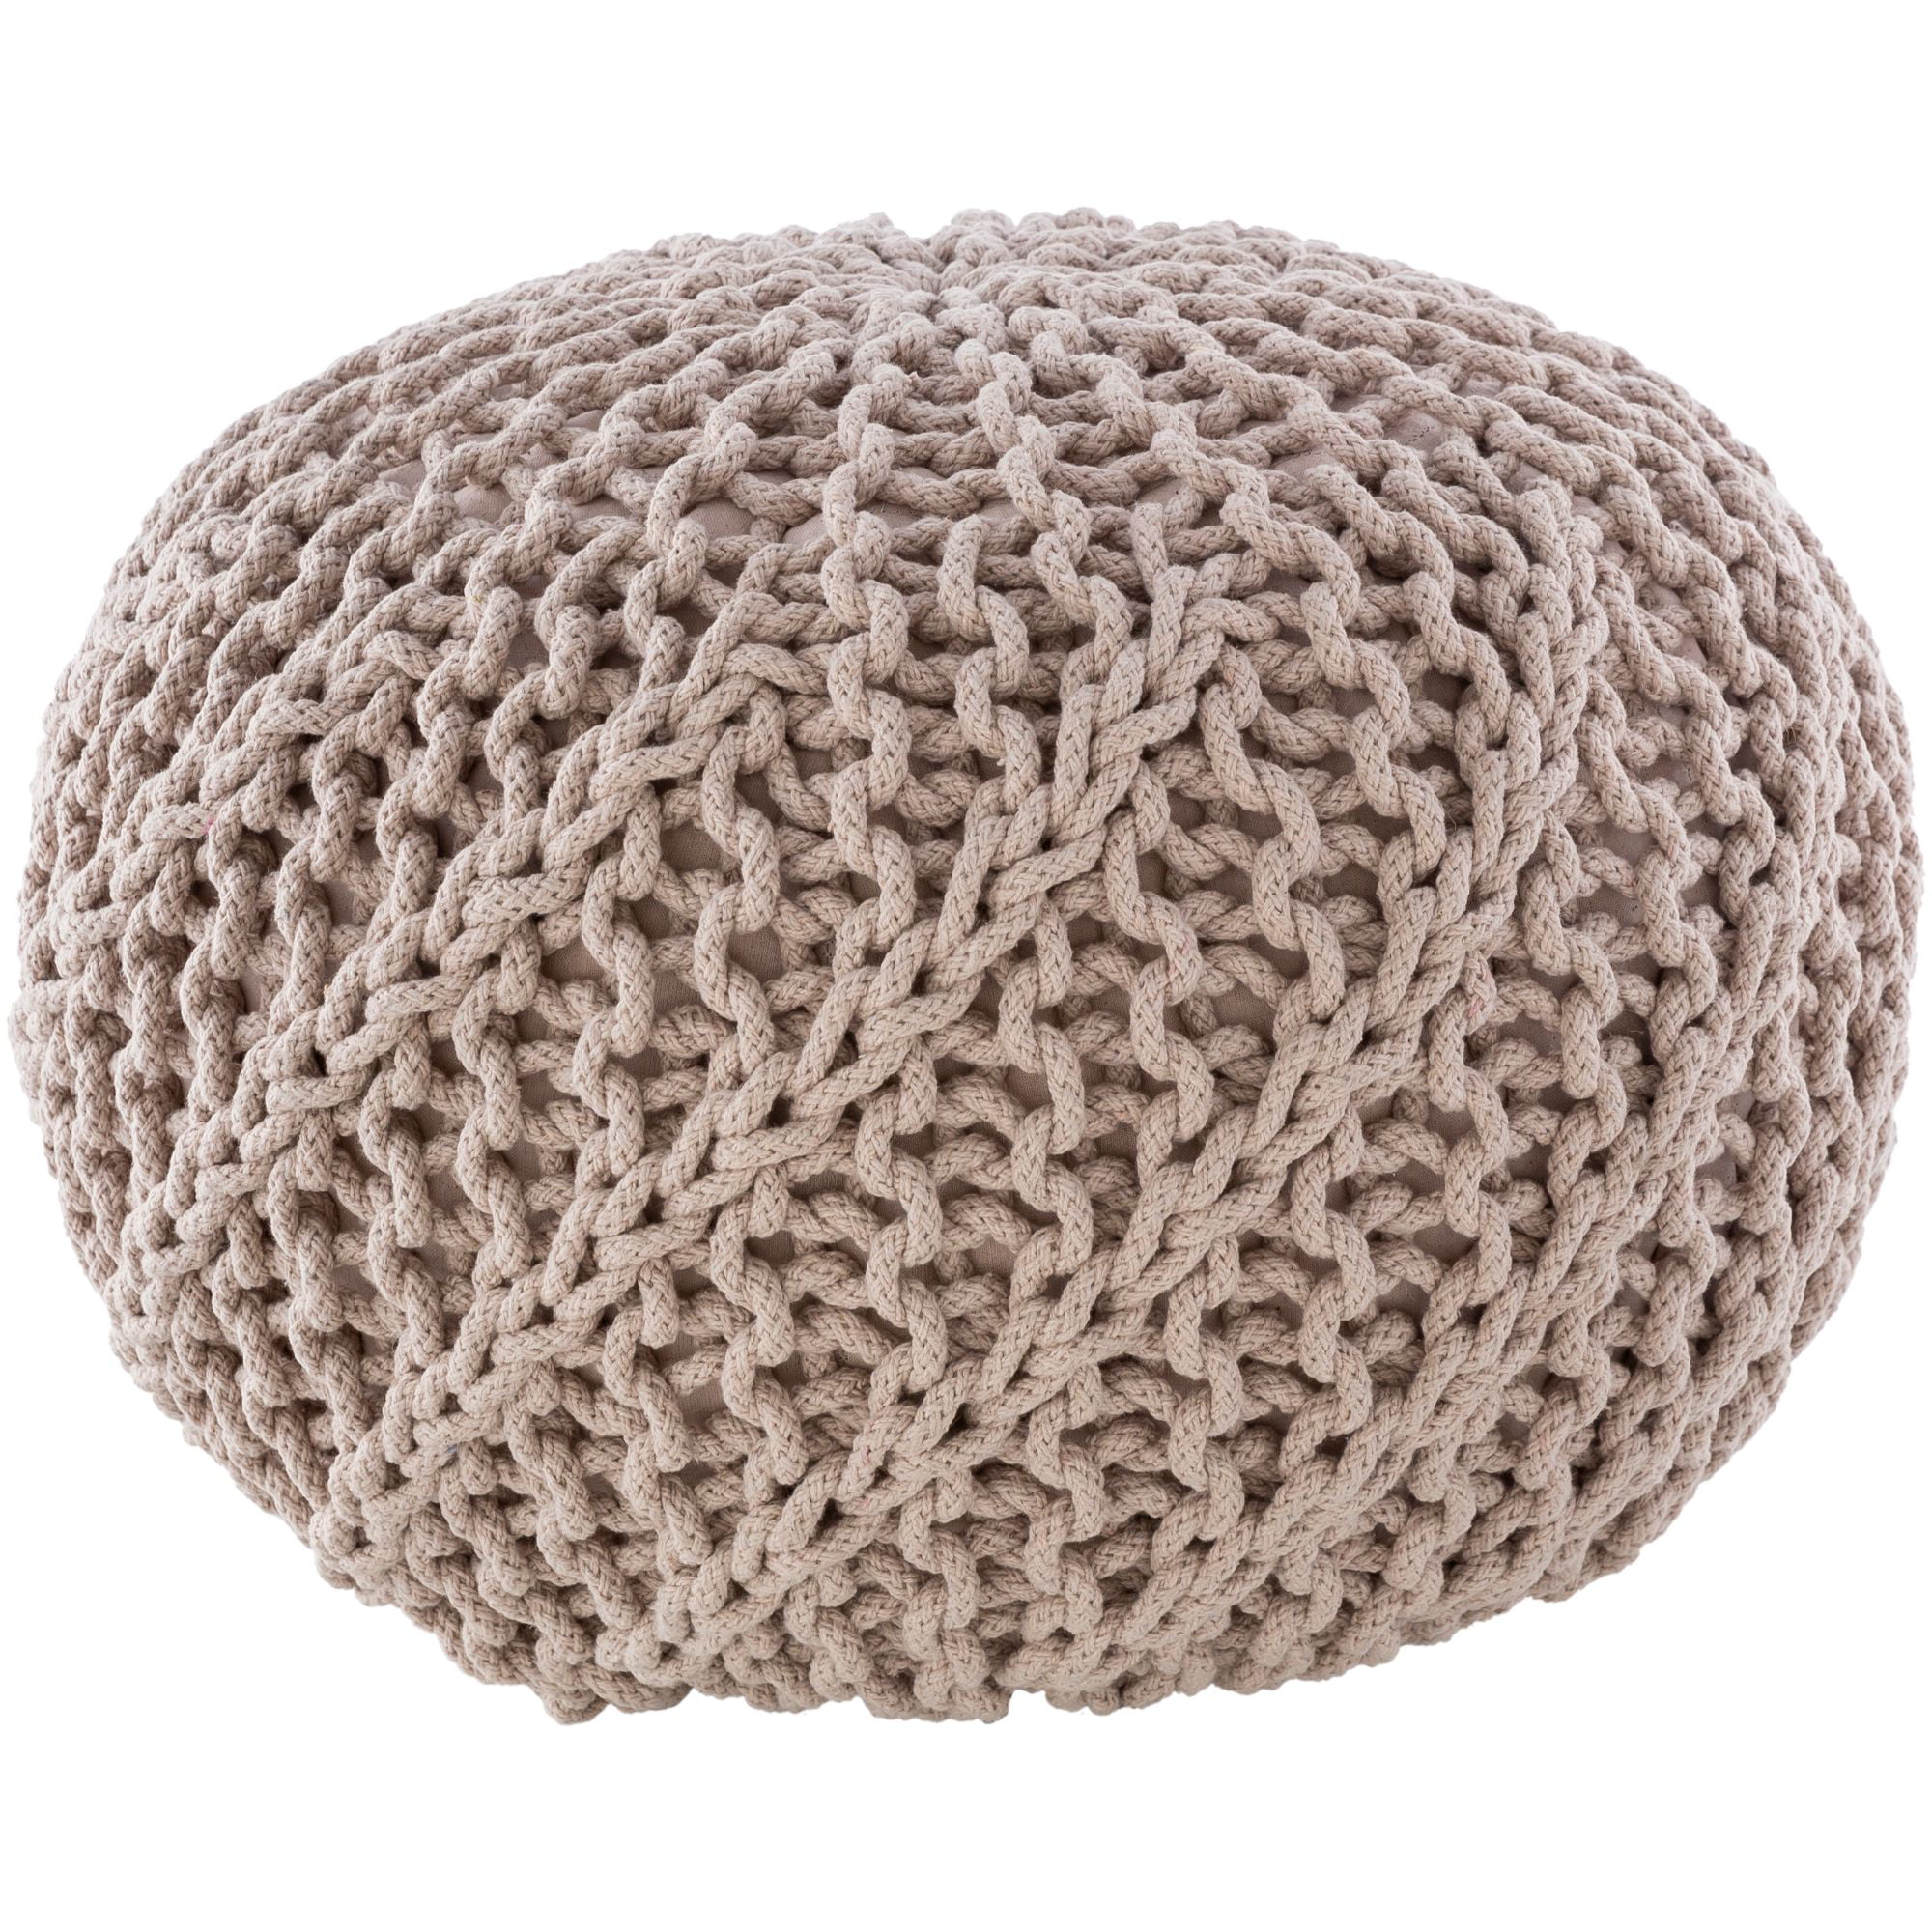 20" Solid Ivory Knitted Pattern Spherical Pouf Ottoman ...